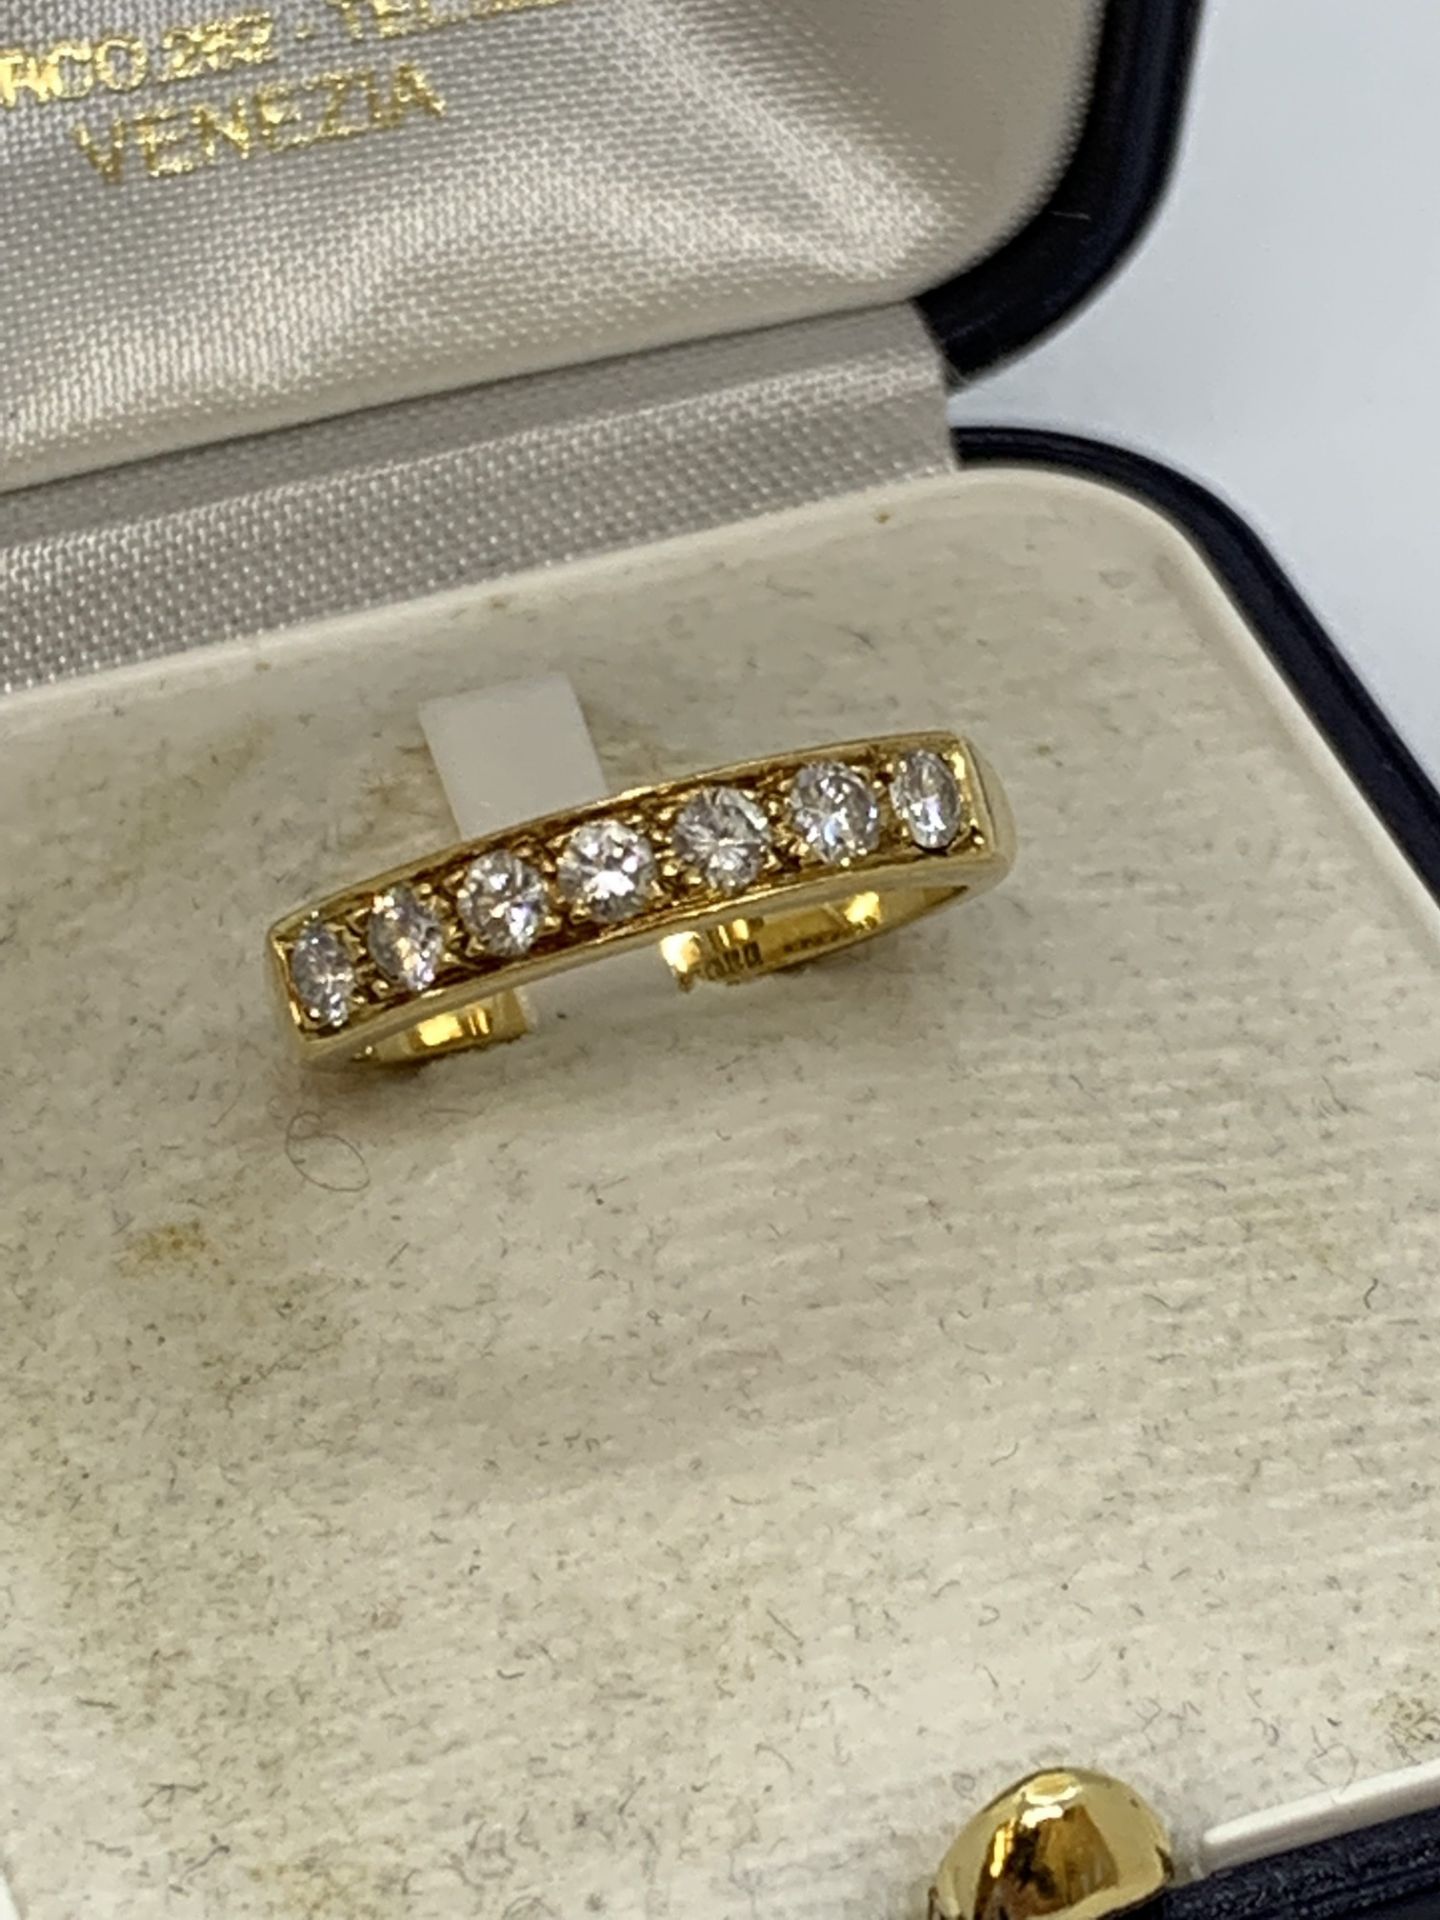 DIAMOND 1/2 ETERNITY RING IN 18ct YELLOW GOLD - 4.1g APPROX - SIZE M APPROX - Image 2 of 8